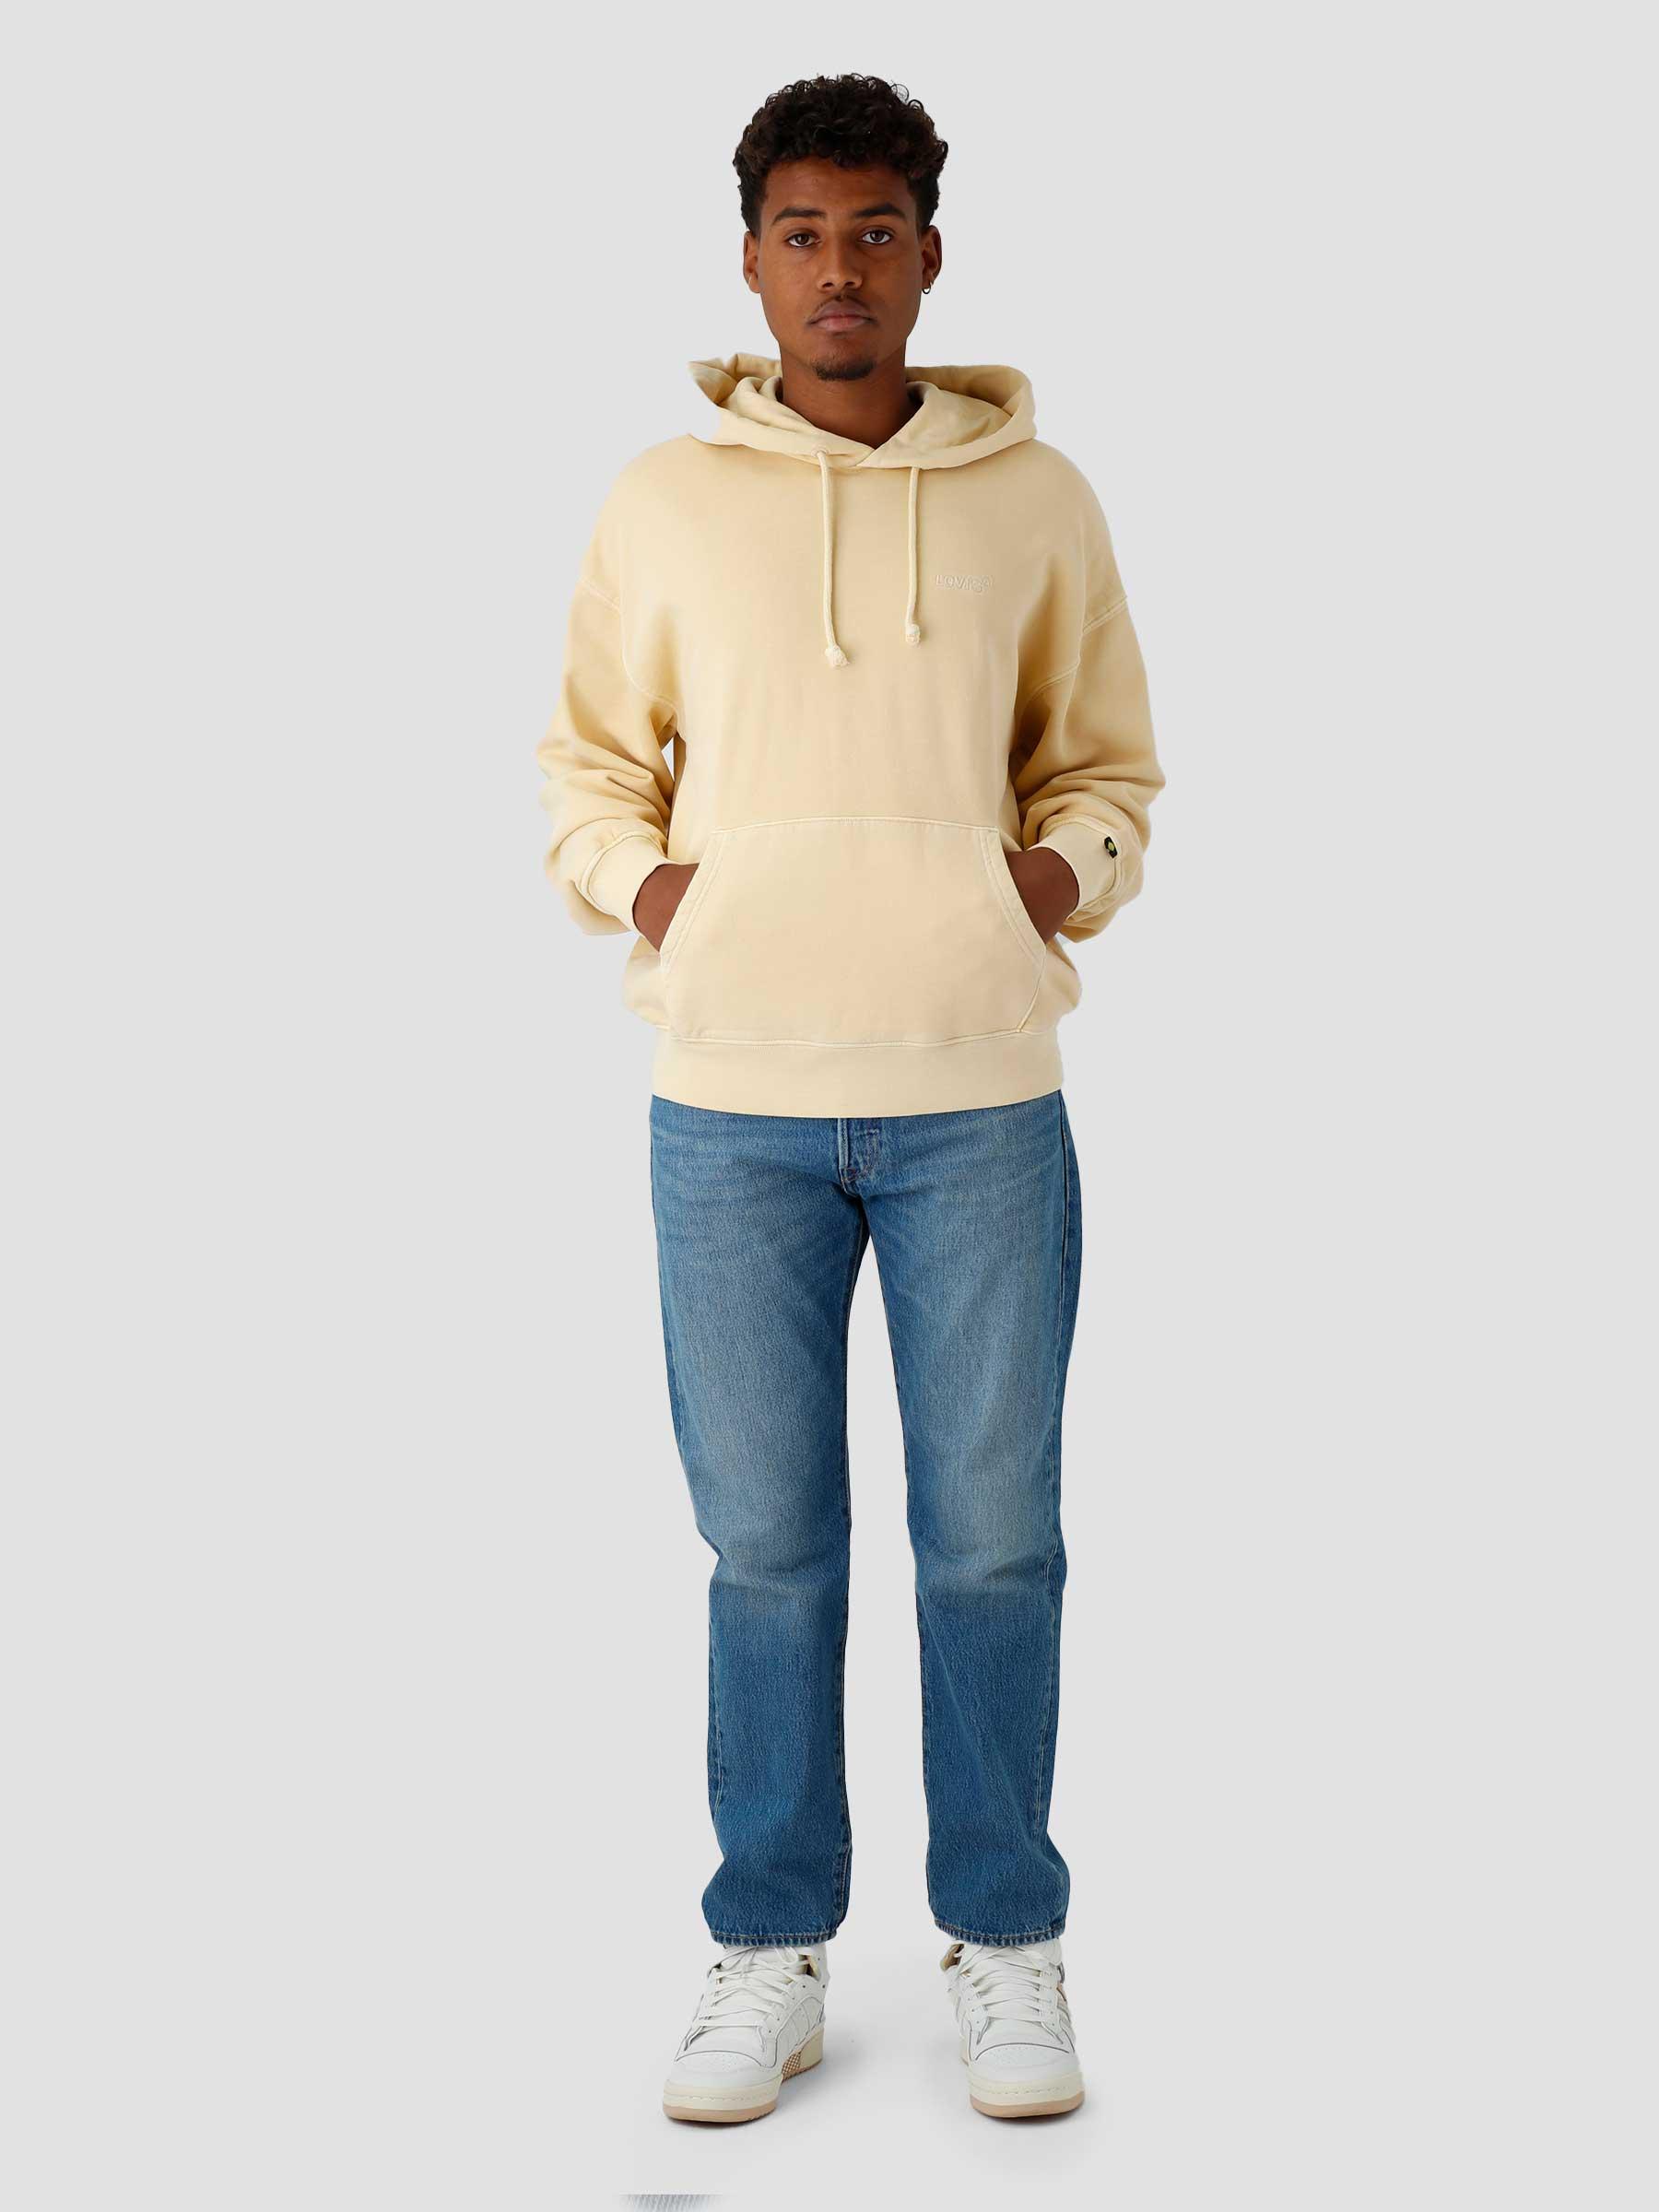 Red Tab Sweats Hoodie Yellow Plum Fp S Green A0747-0029